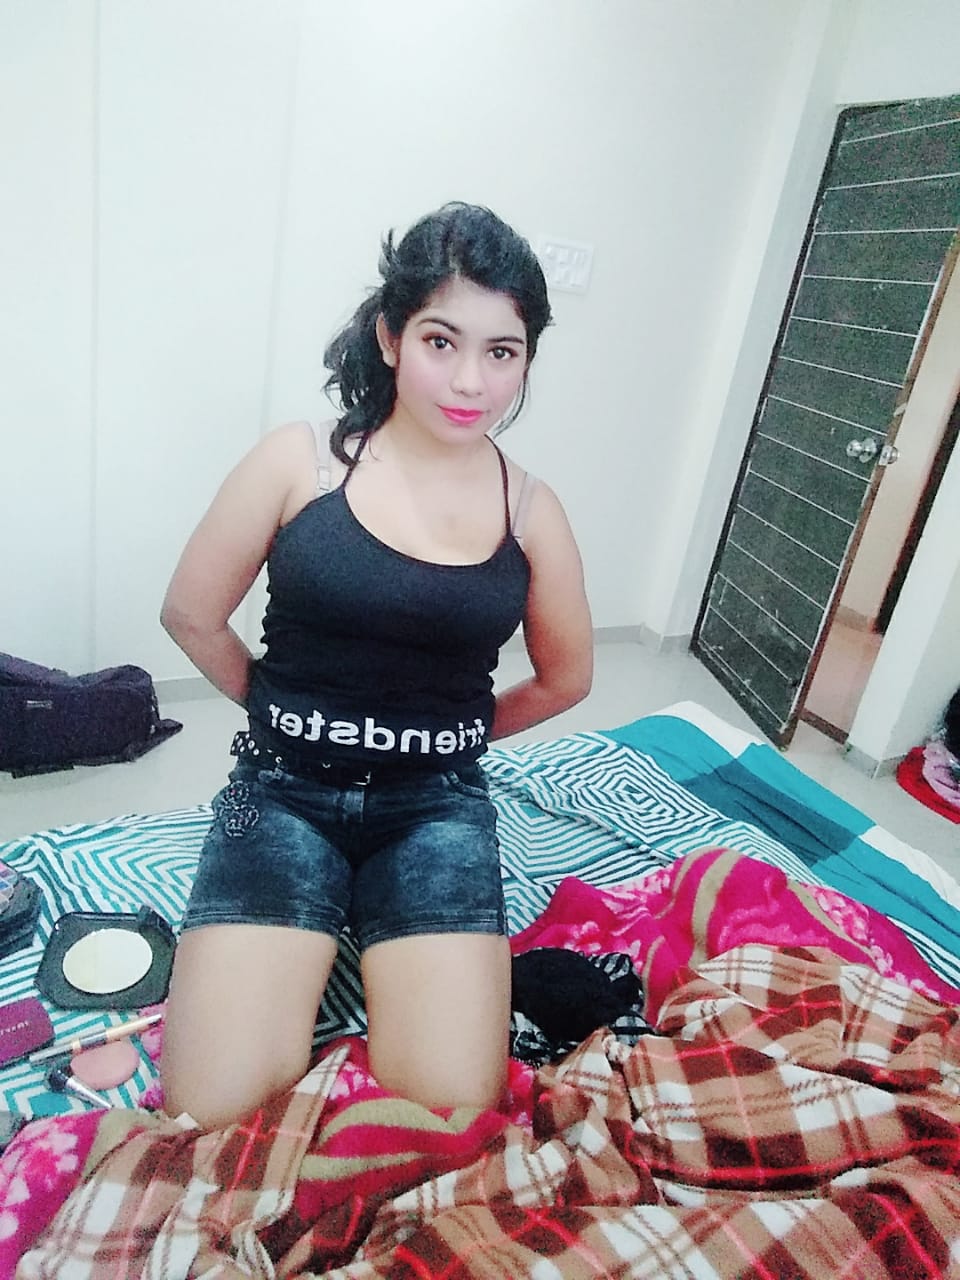 Top Profile from Hyderabad